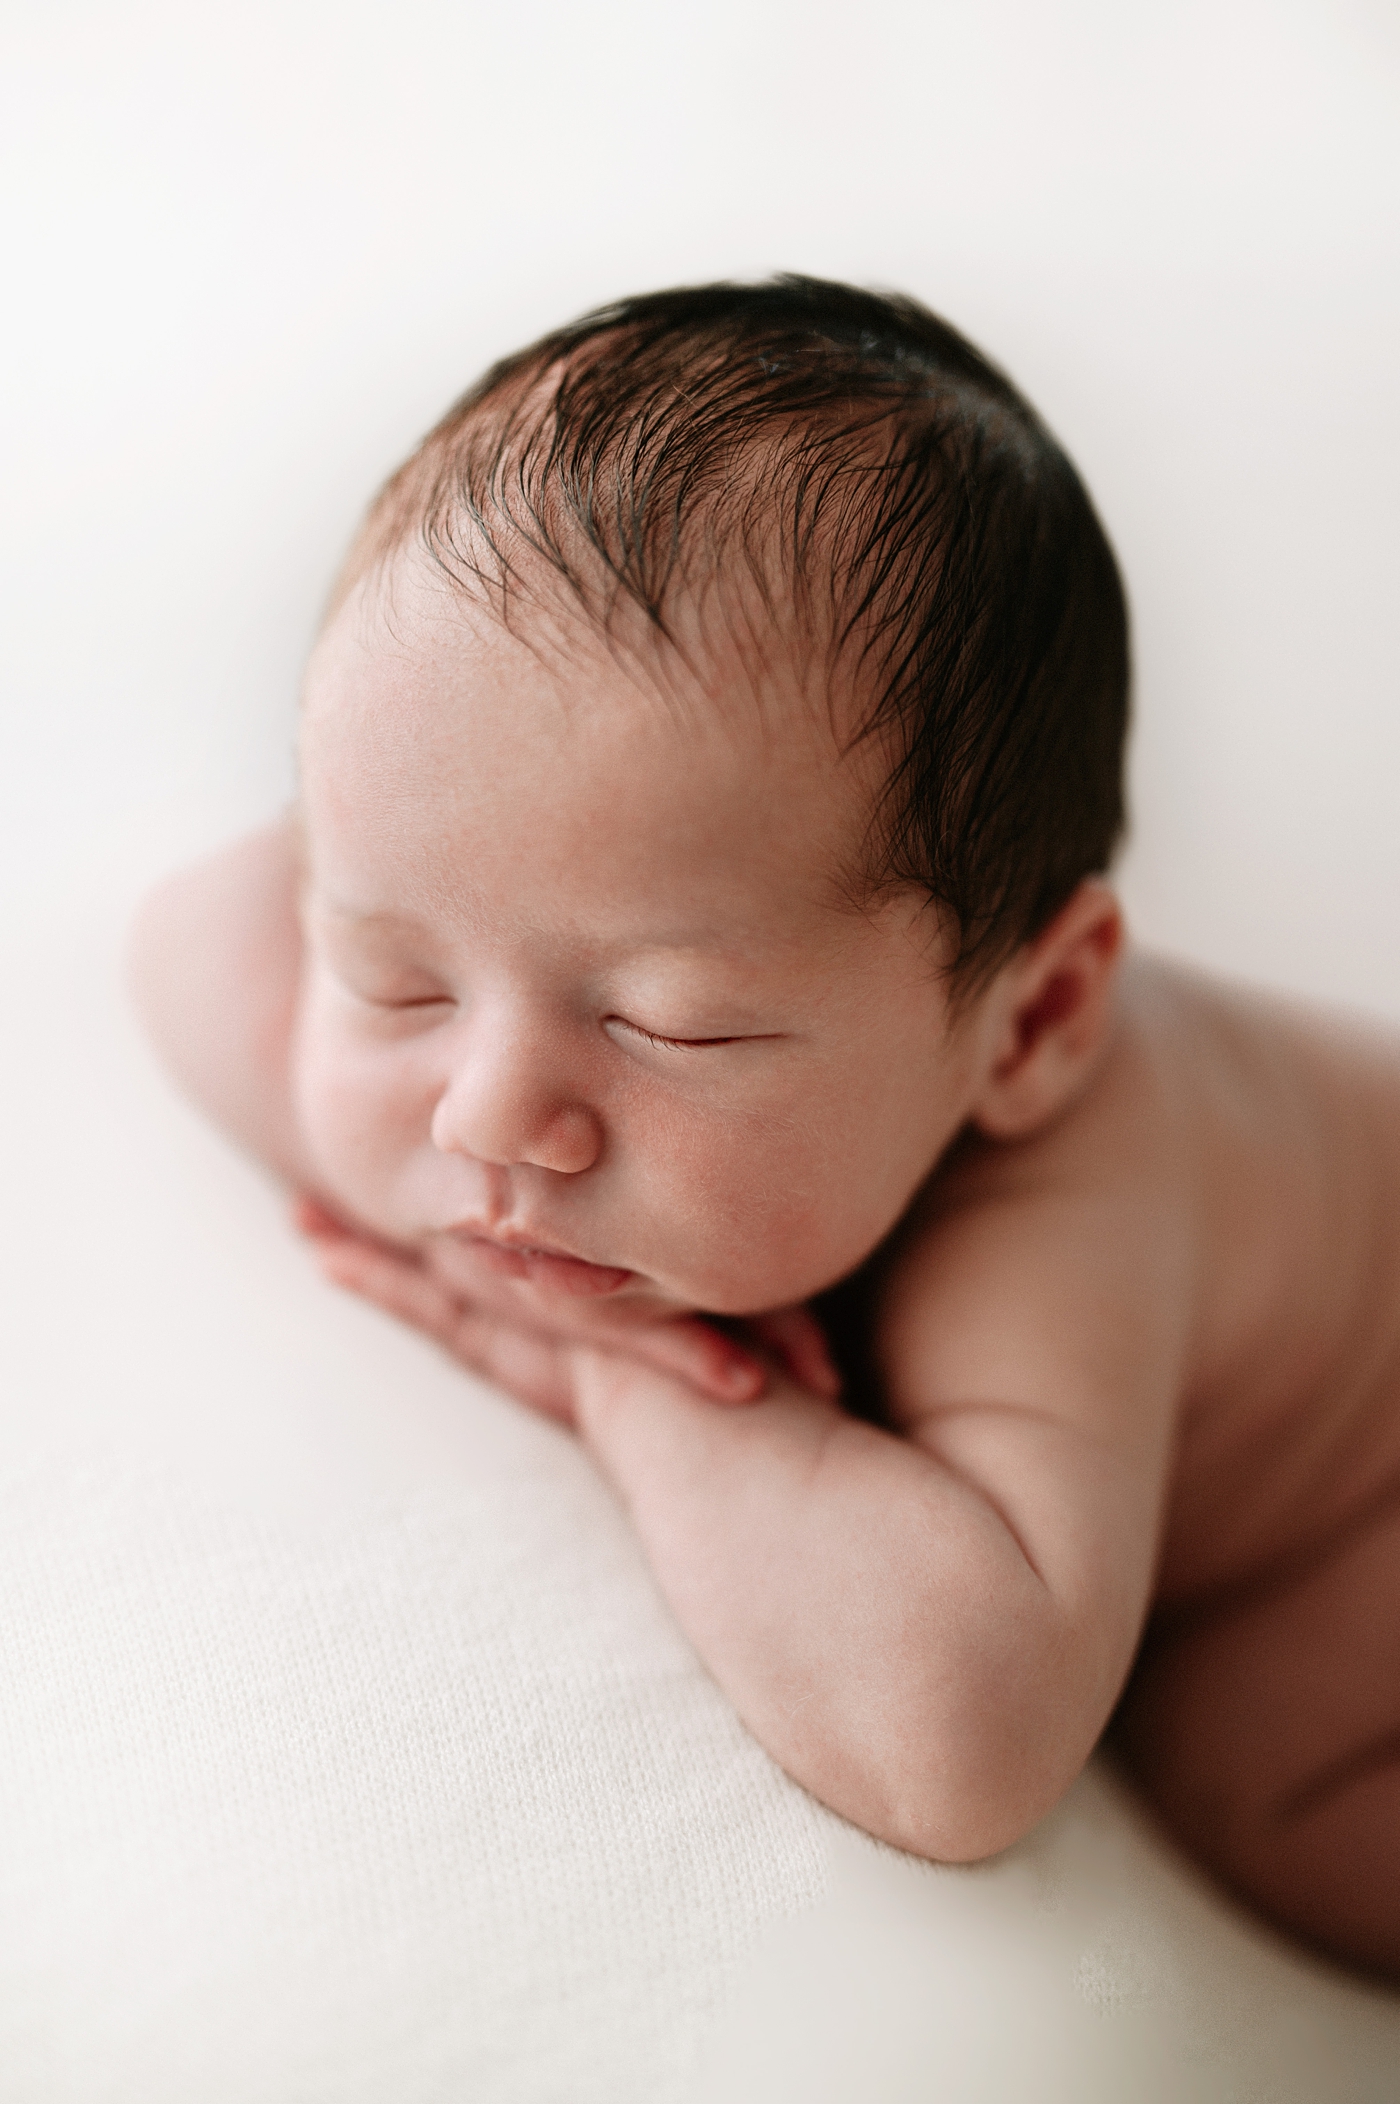 Baby lays with hands under chin. Photo by Meg Newton Photography.